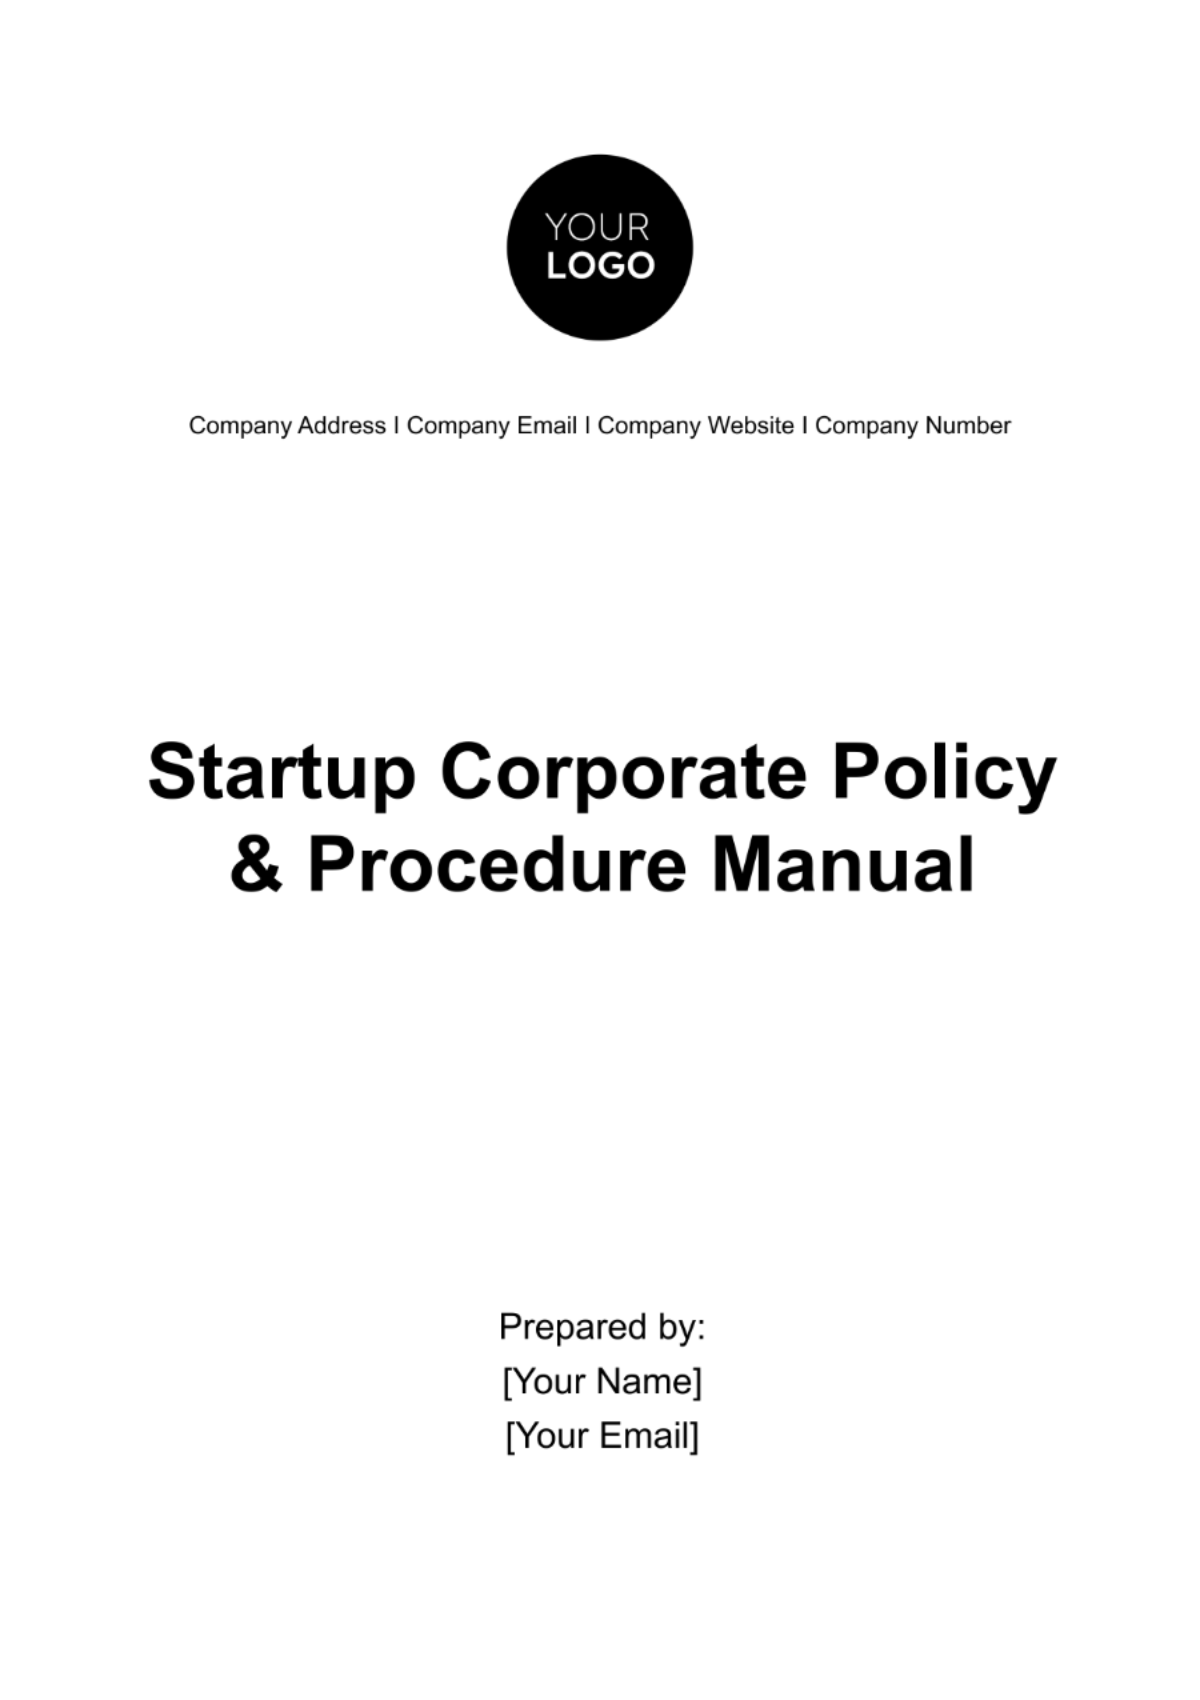 Startup Corporate Policy & Procedure Manual Template